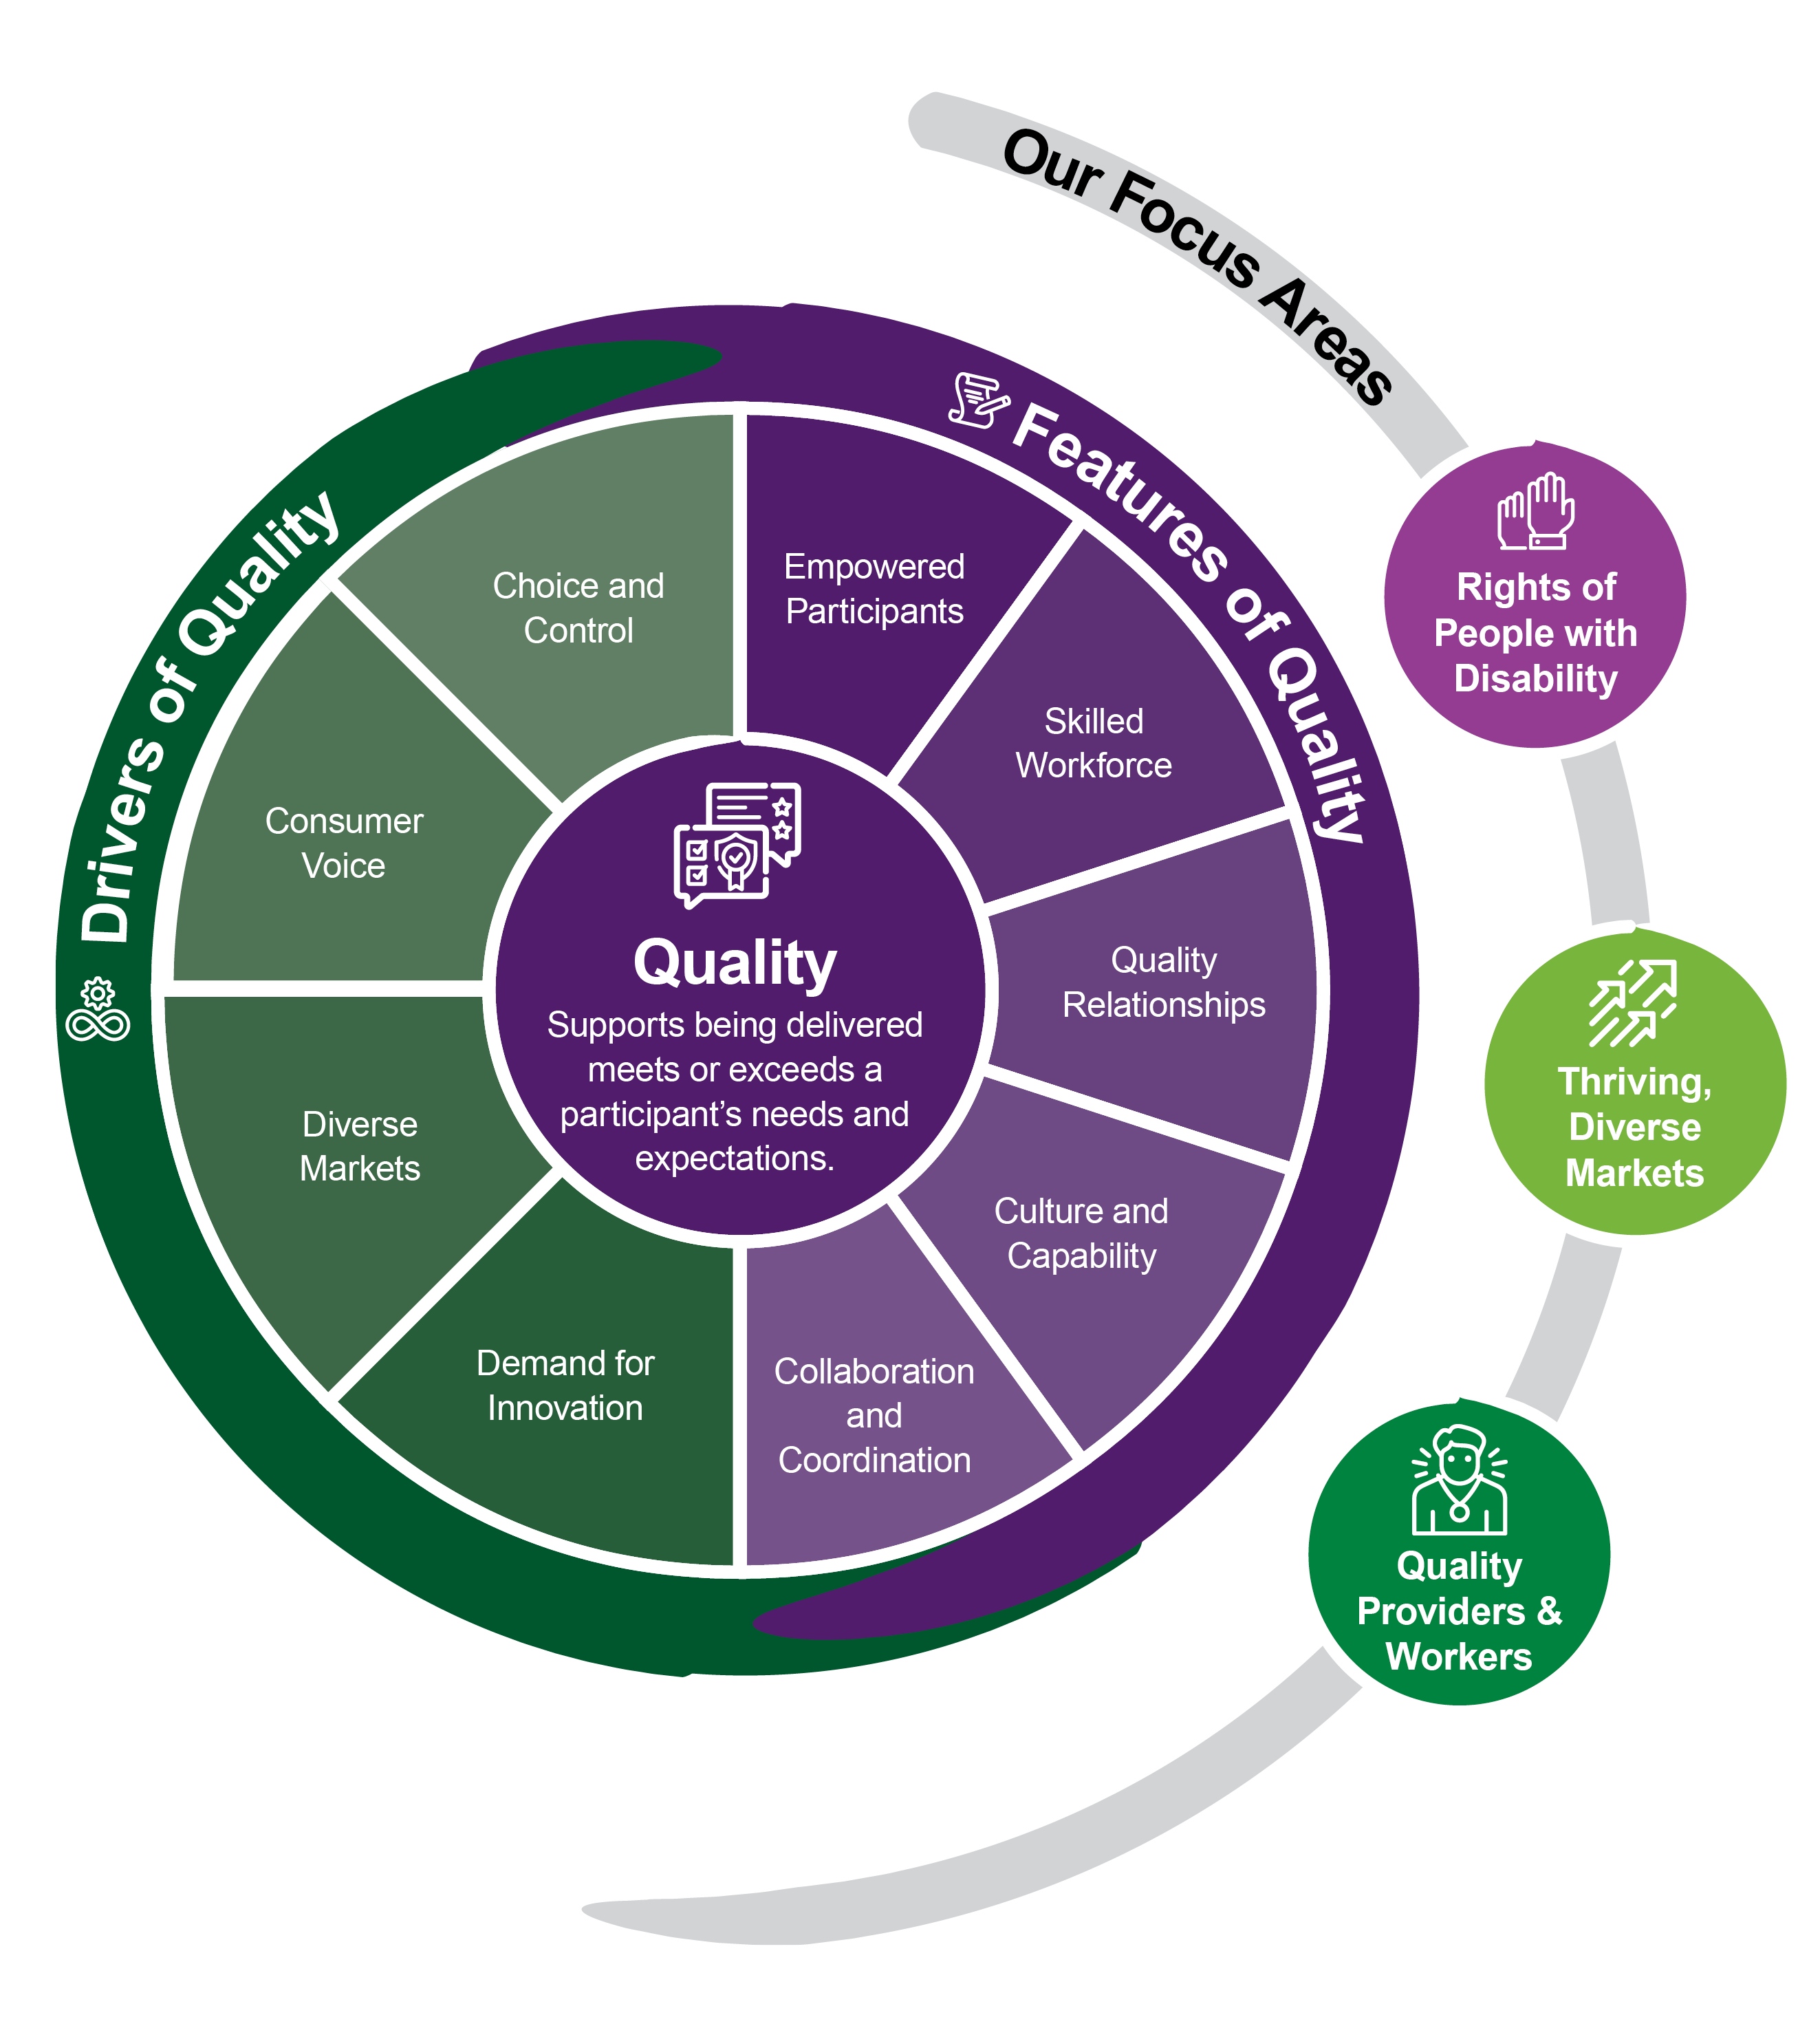 Diagram of quality features and drivers linked to core focus areas